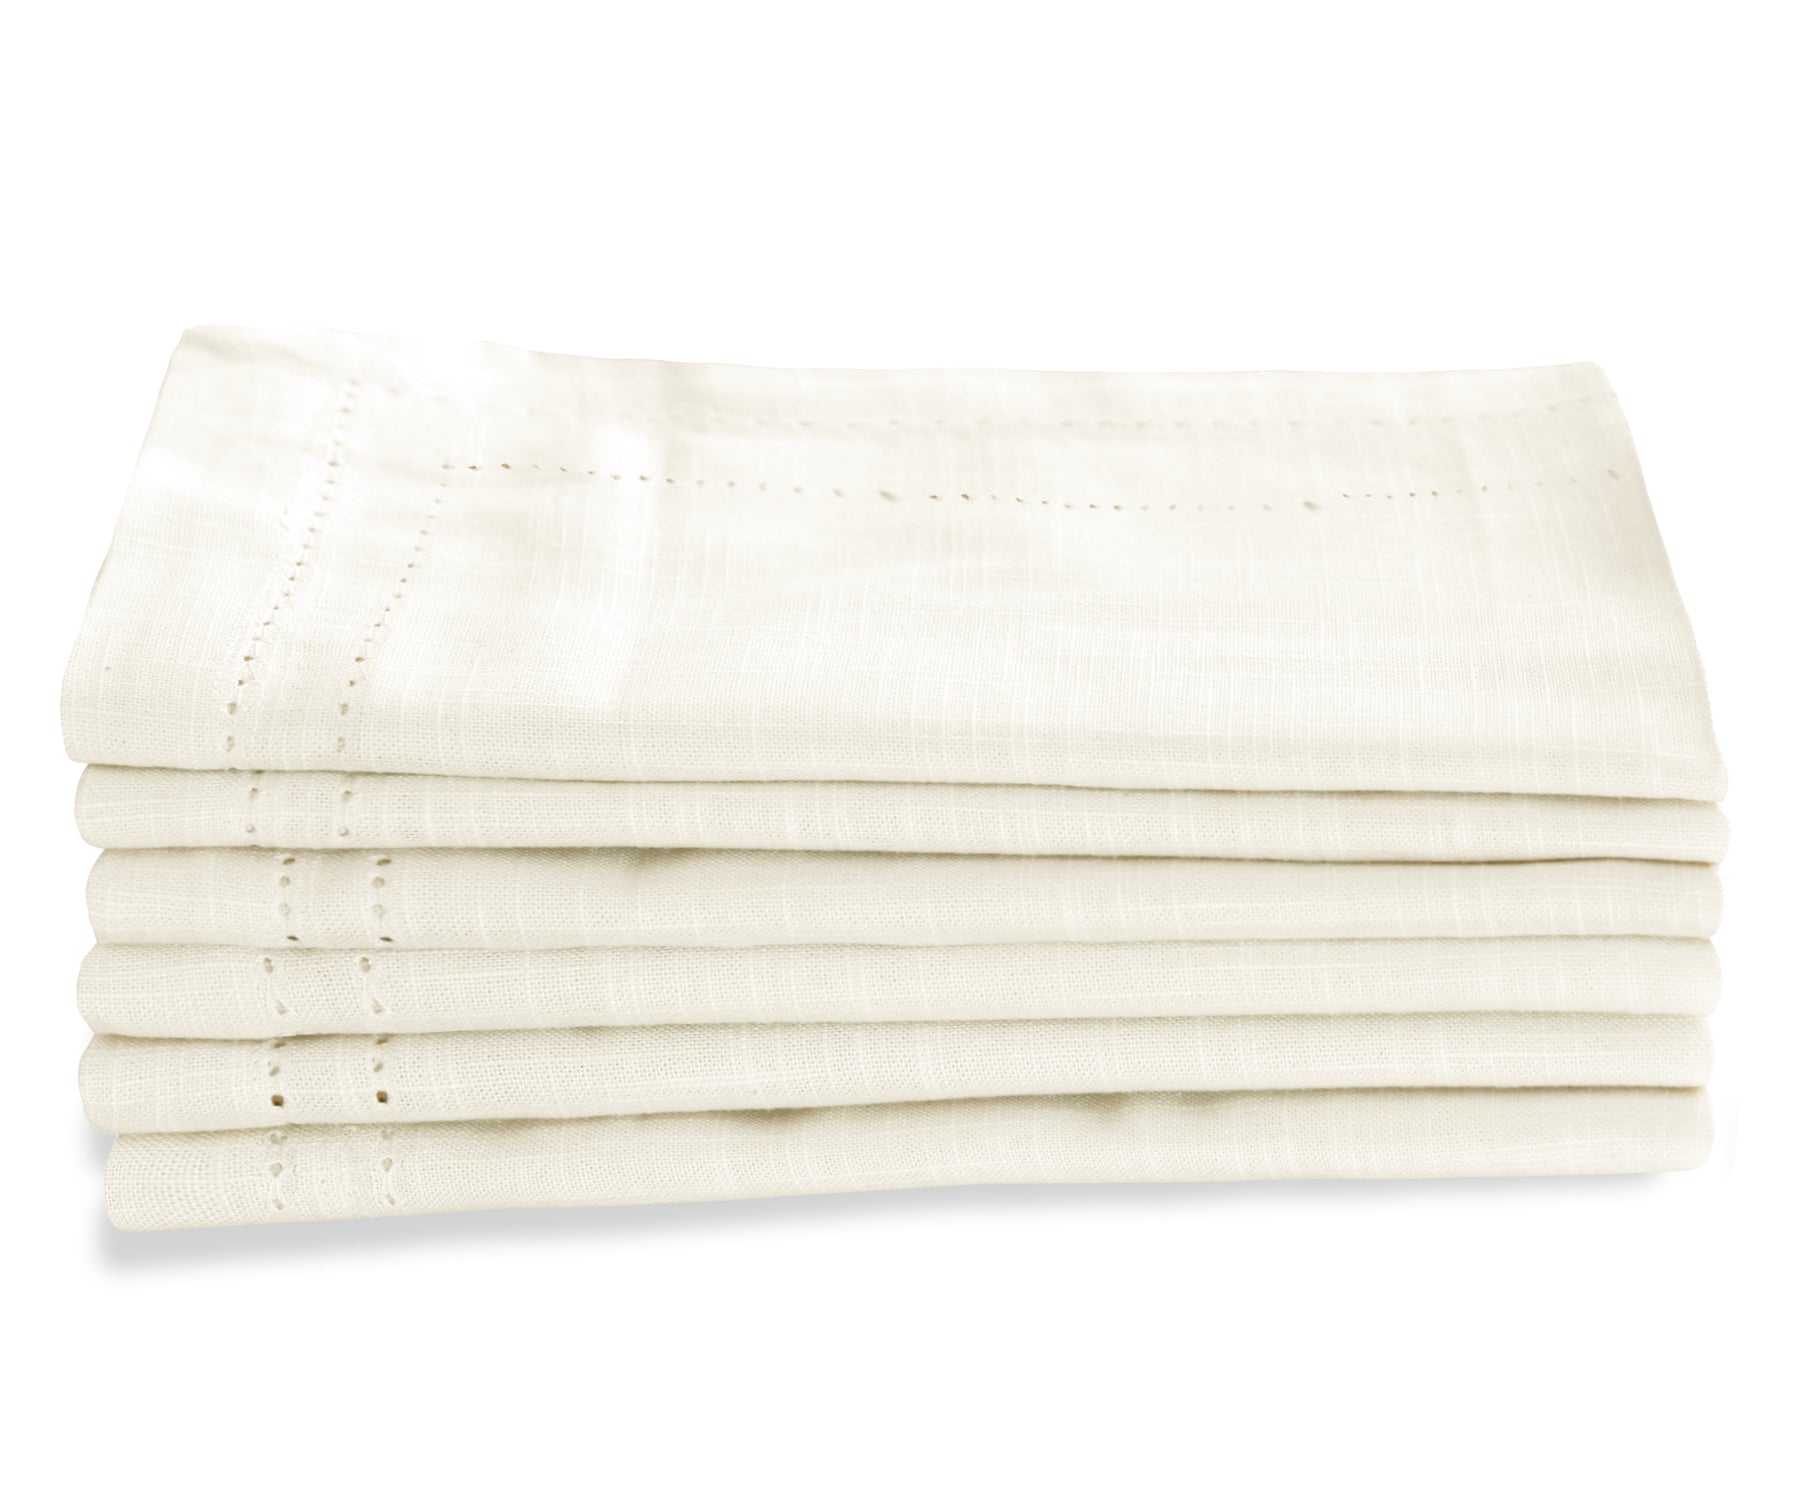 Stack of four custom double hemstitch white cloth napkins on a clean surface